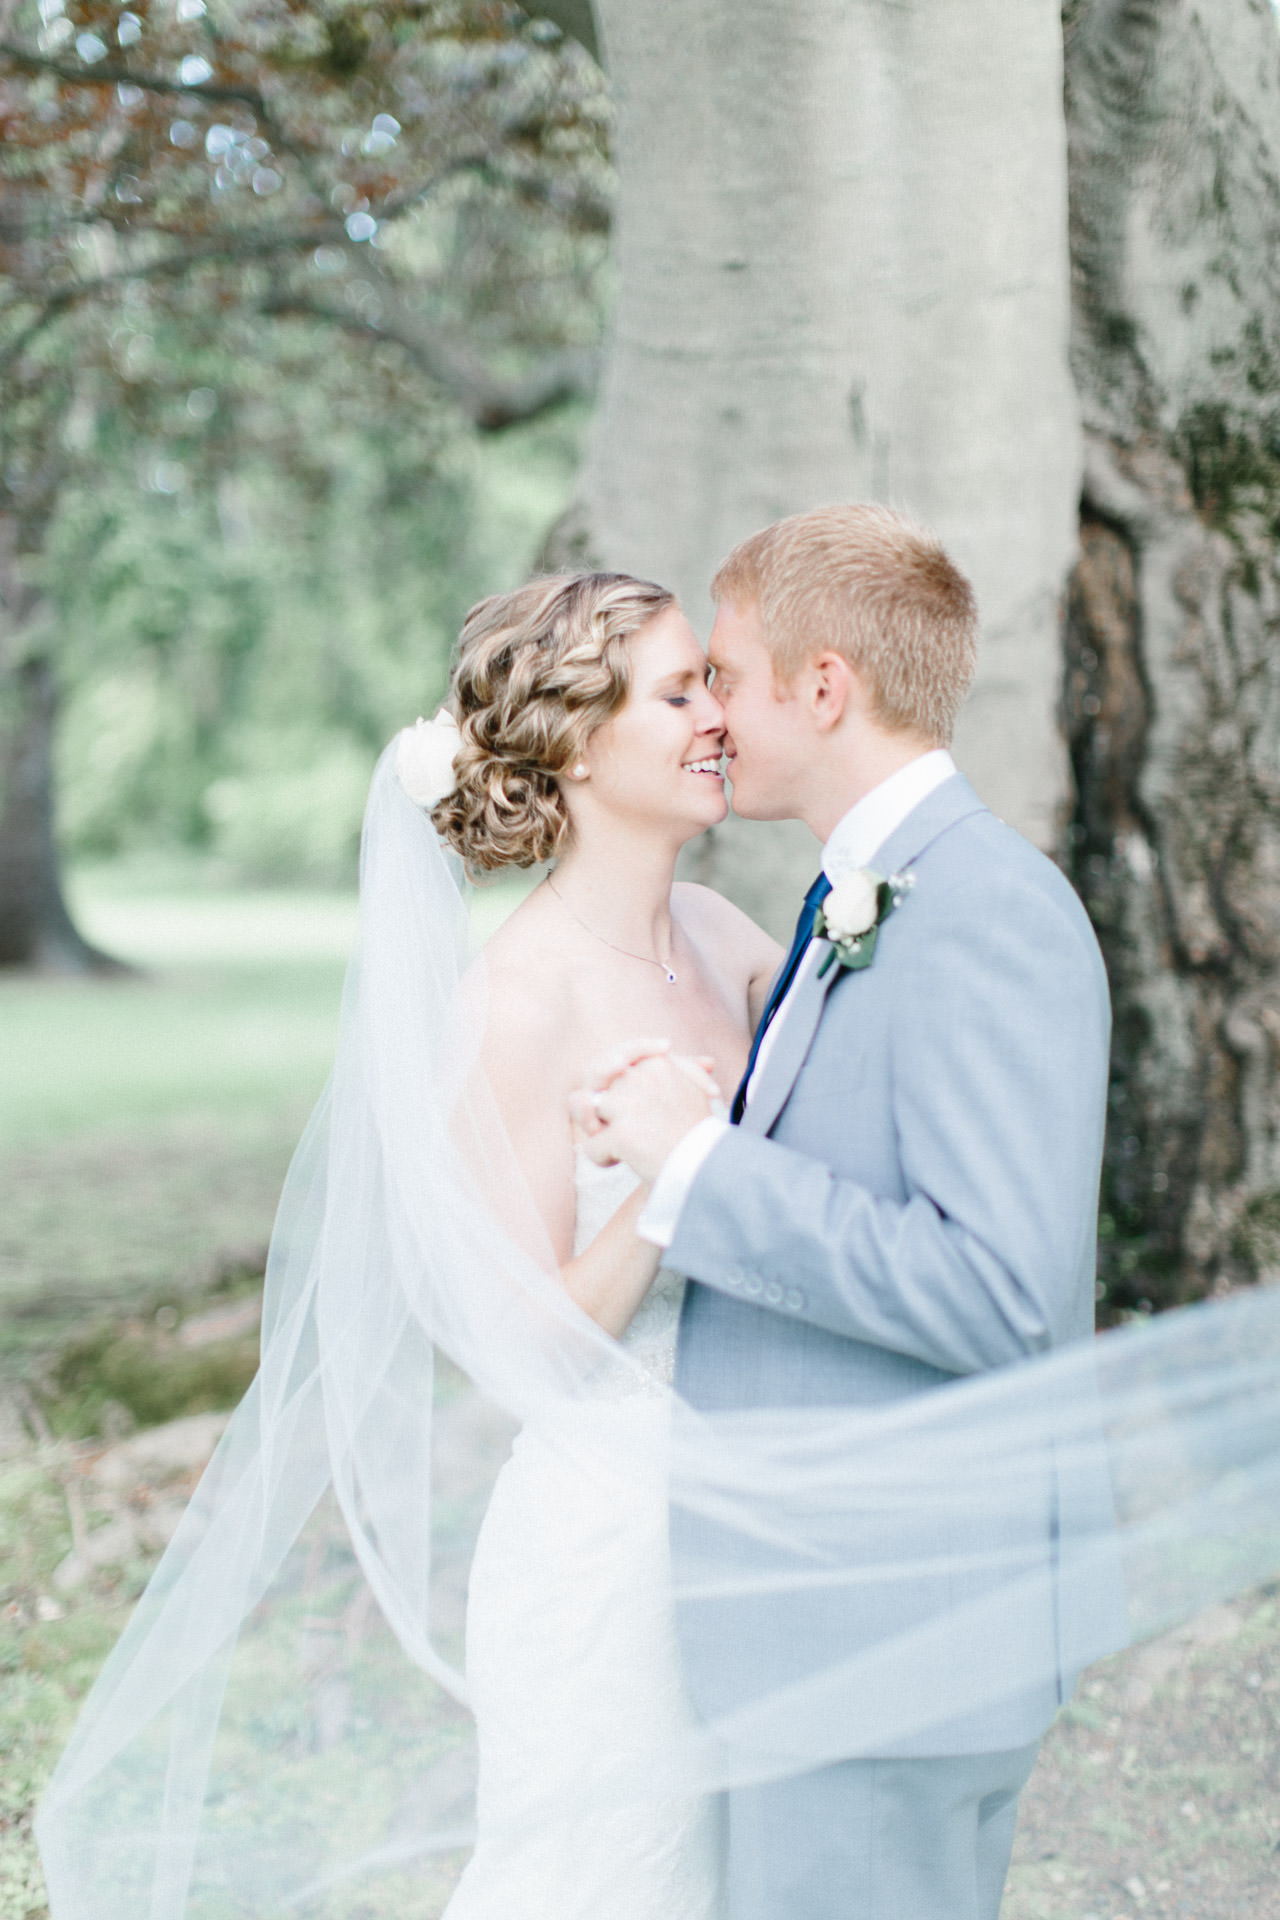 Bride and Groom kissing at Peirce Farm at Witch Hill in Topsfield, MA